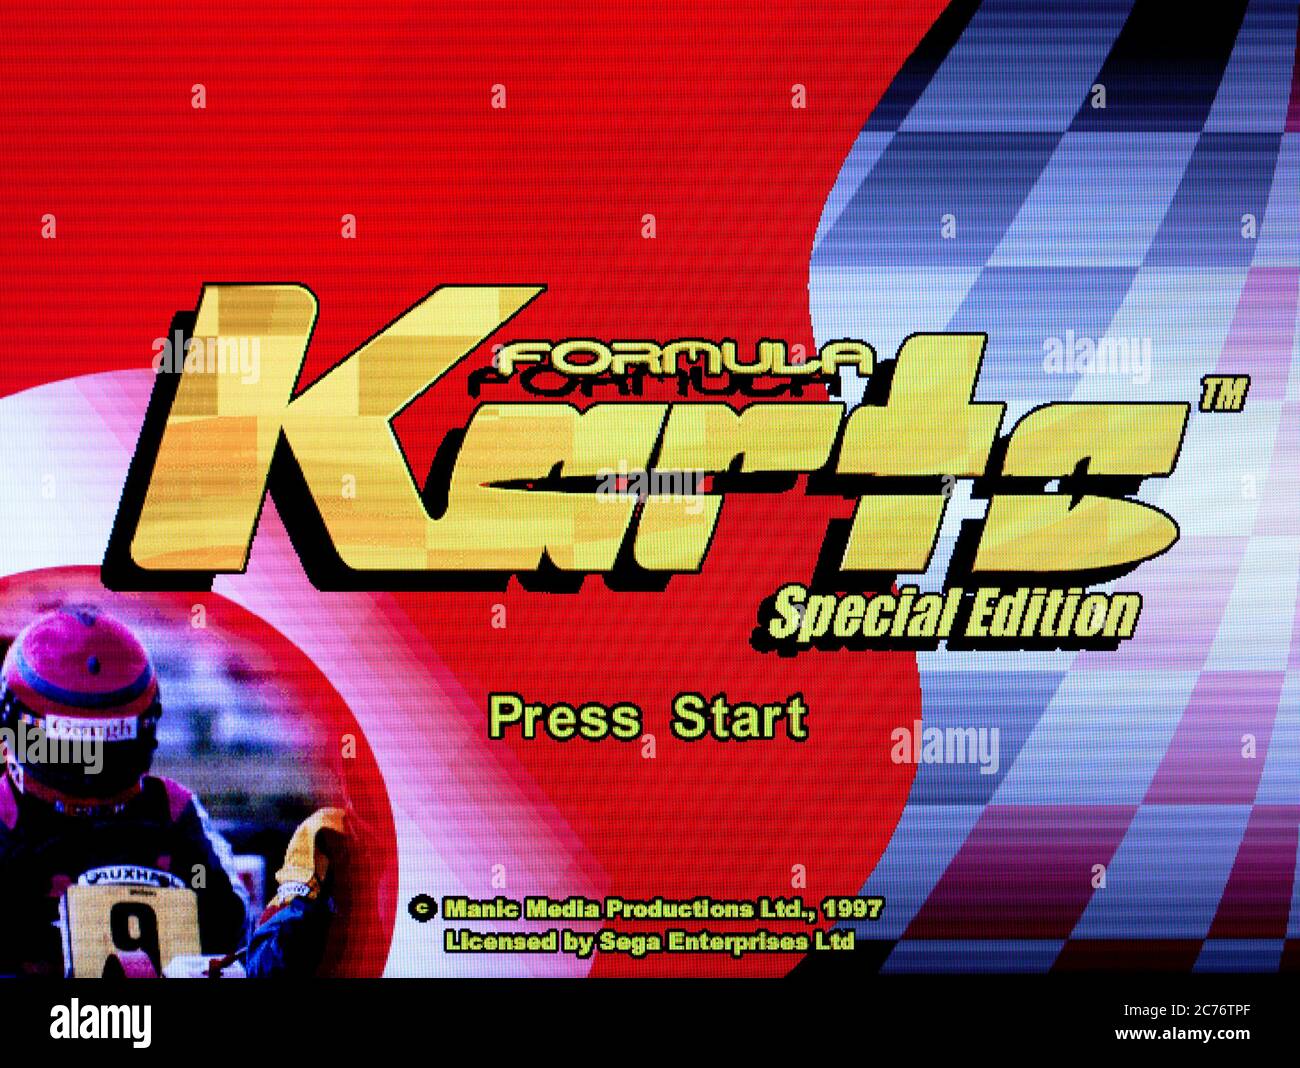 Formula Karts Special Edition - Sega Saturn Videogame - Editorial use only Stock Photo